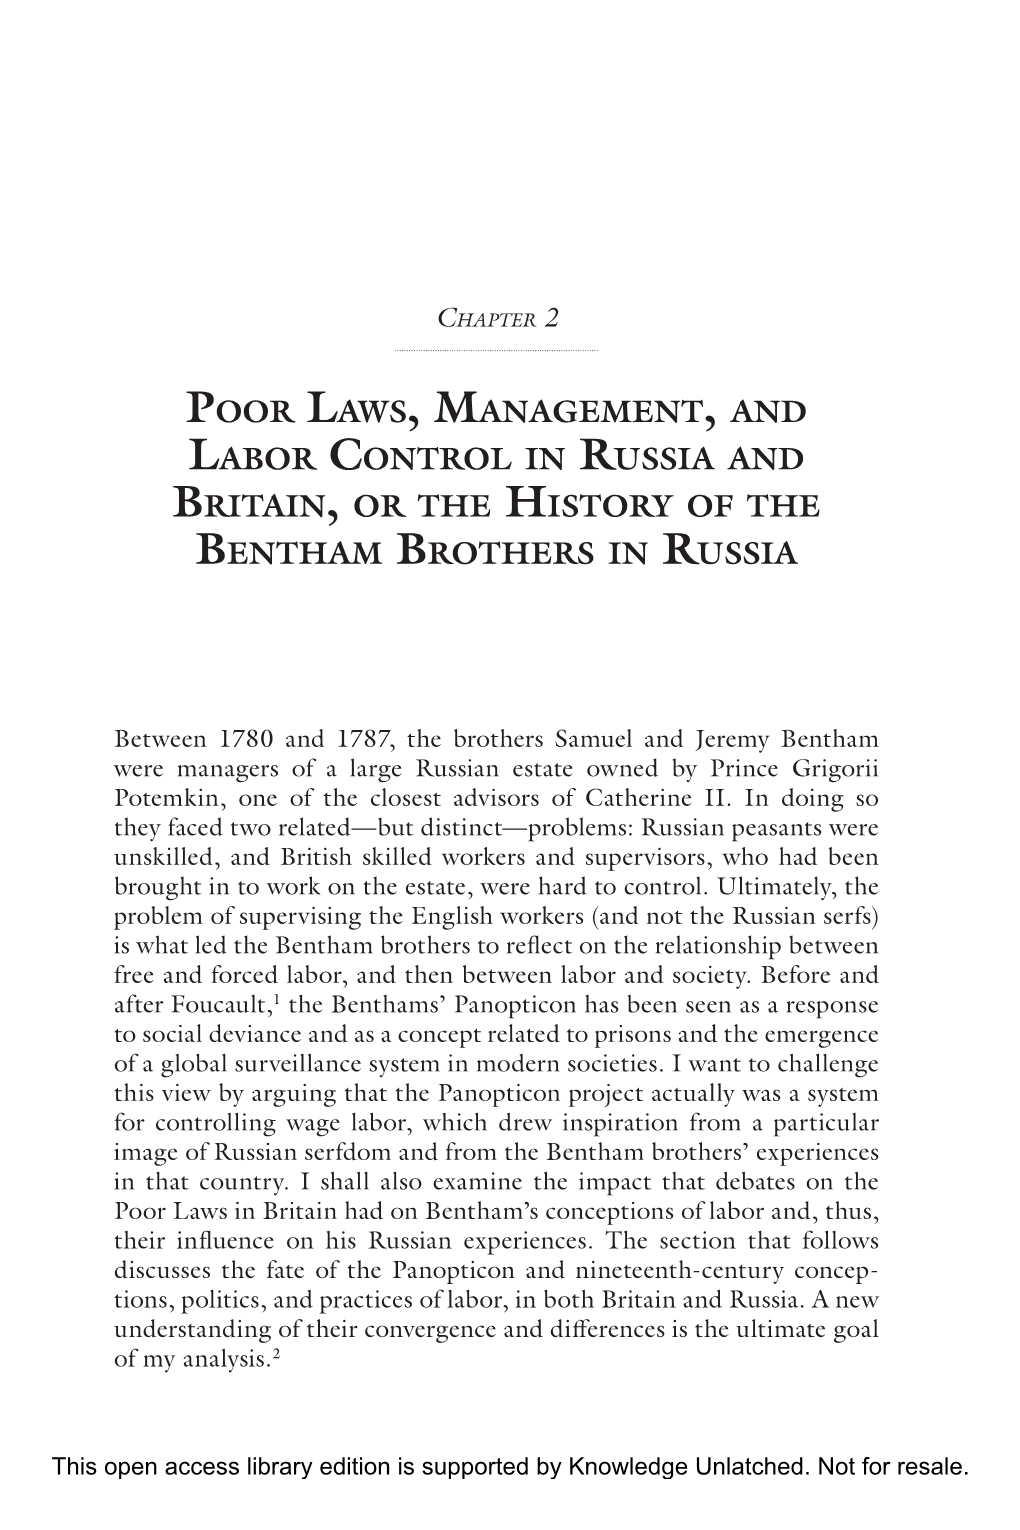 Poor Laws, Management, and Labor Control in Russia and Britain, Or the History of the Bentham Brothers in Russia